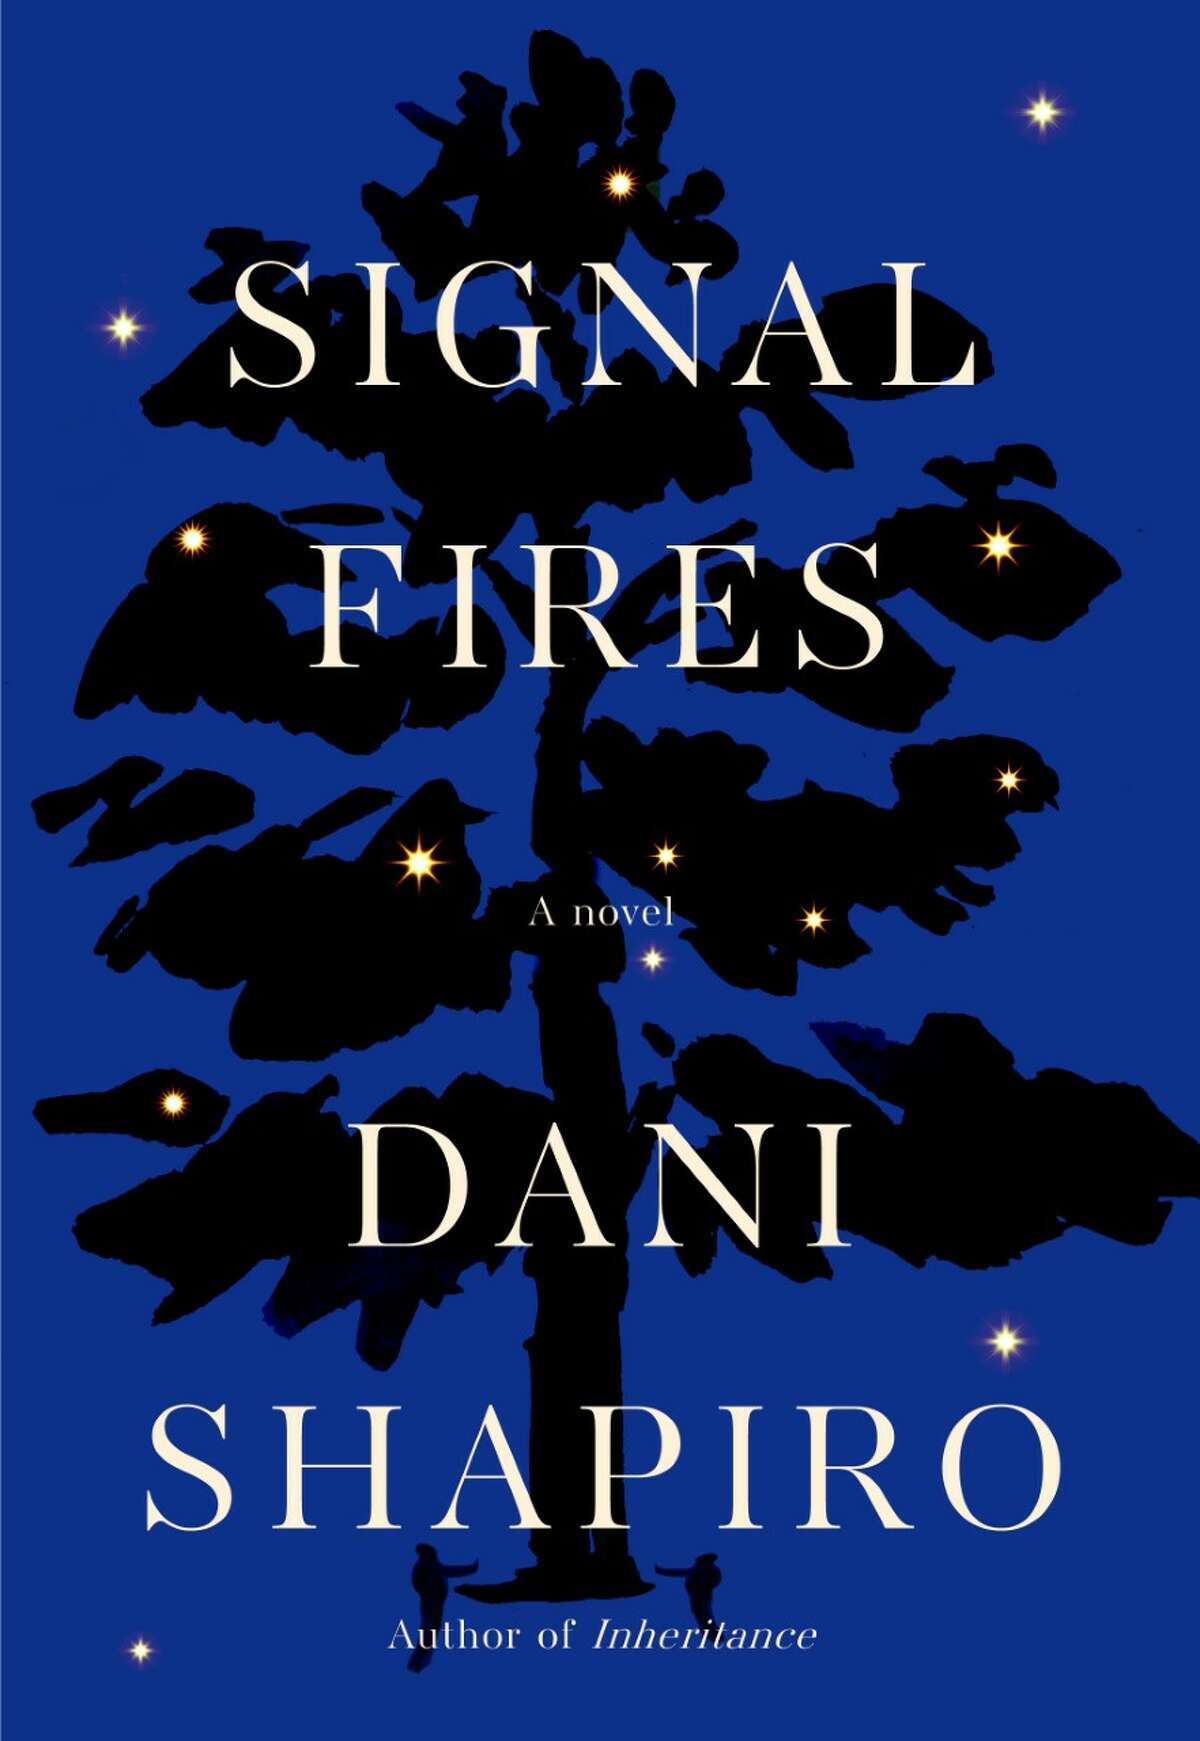 Bethlehem author Dani Shapiro's most recent book "Signal Fires" was published in October.  